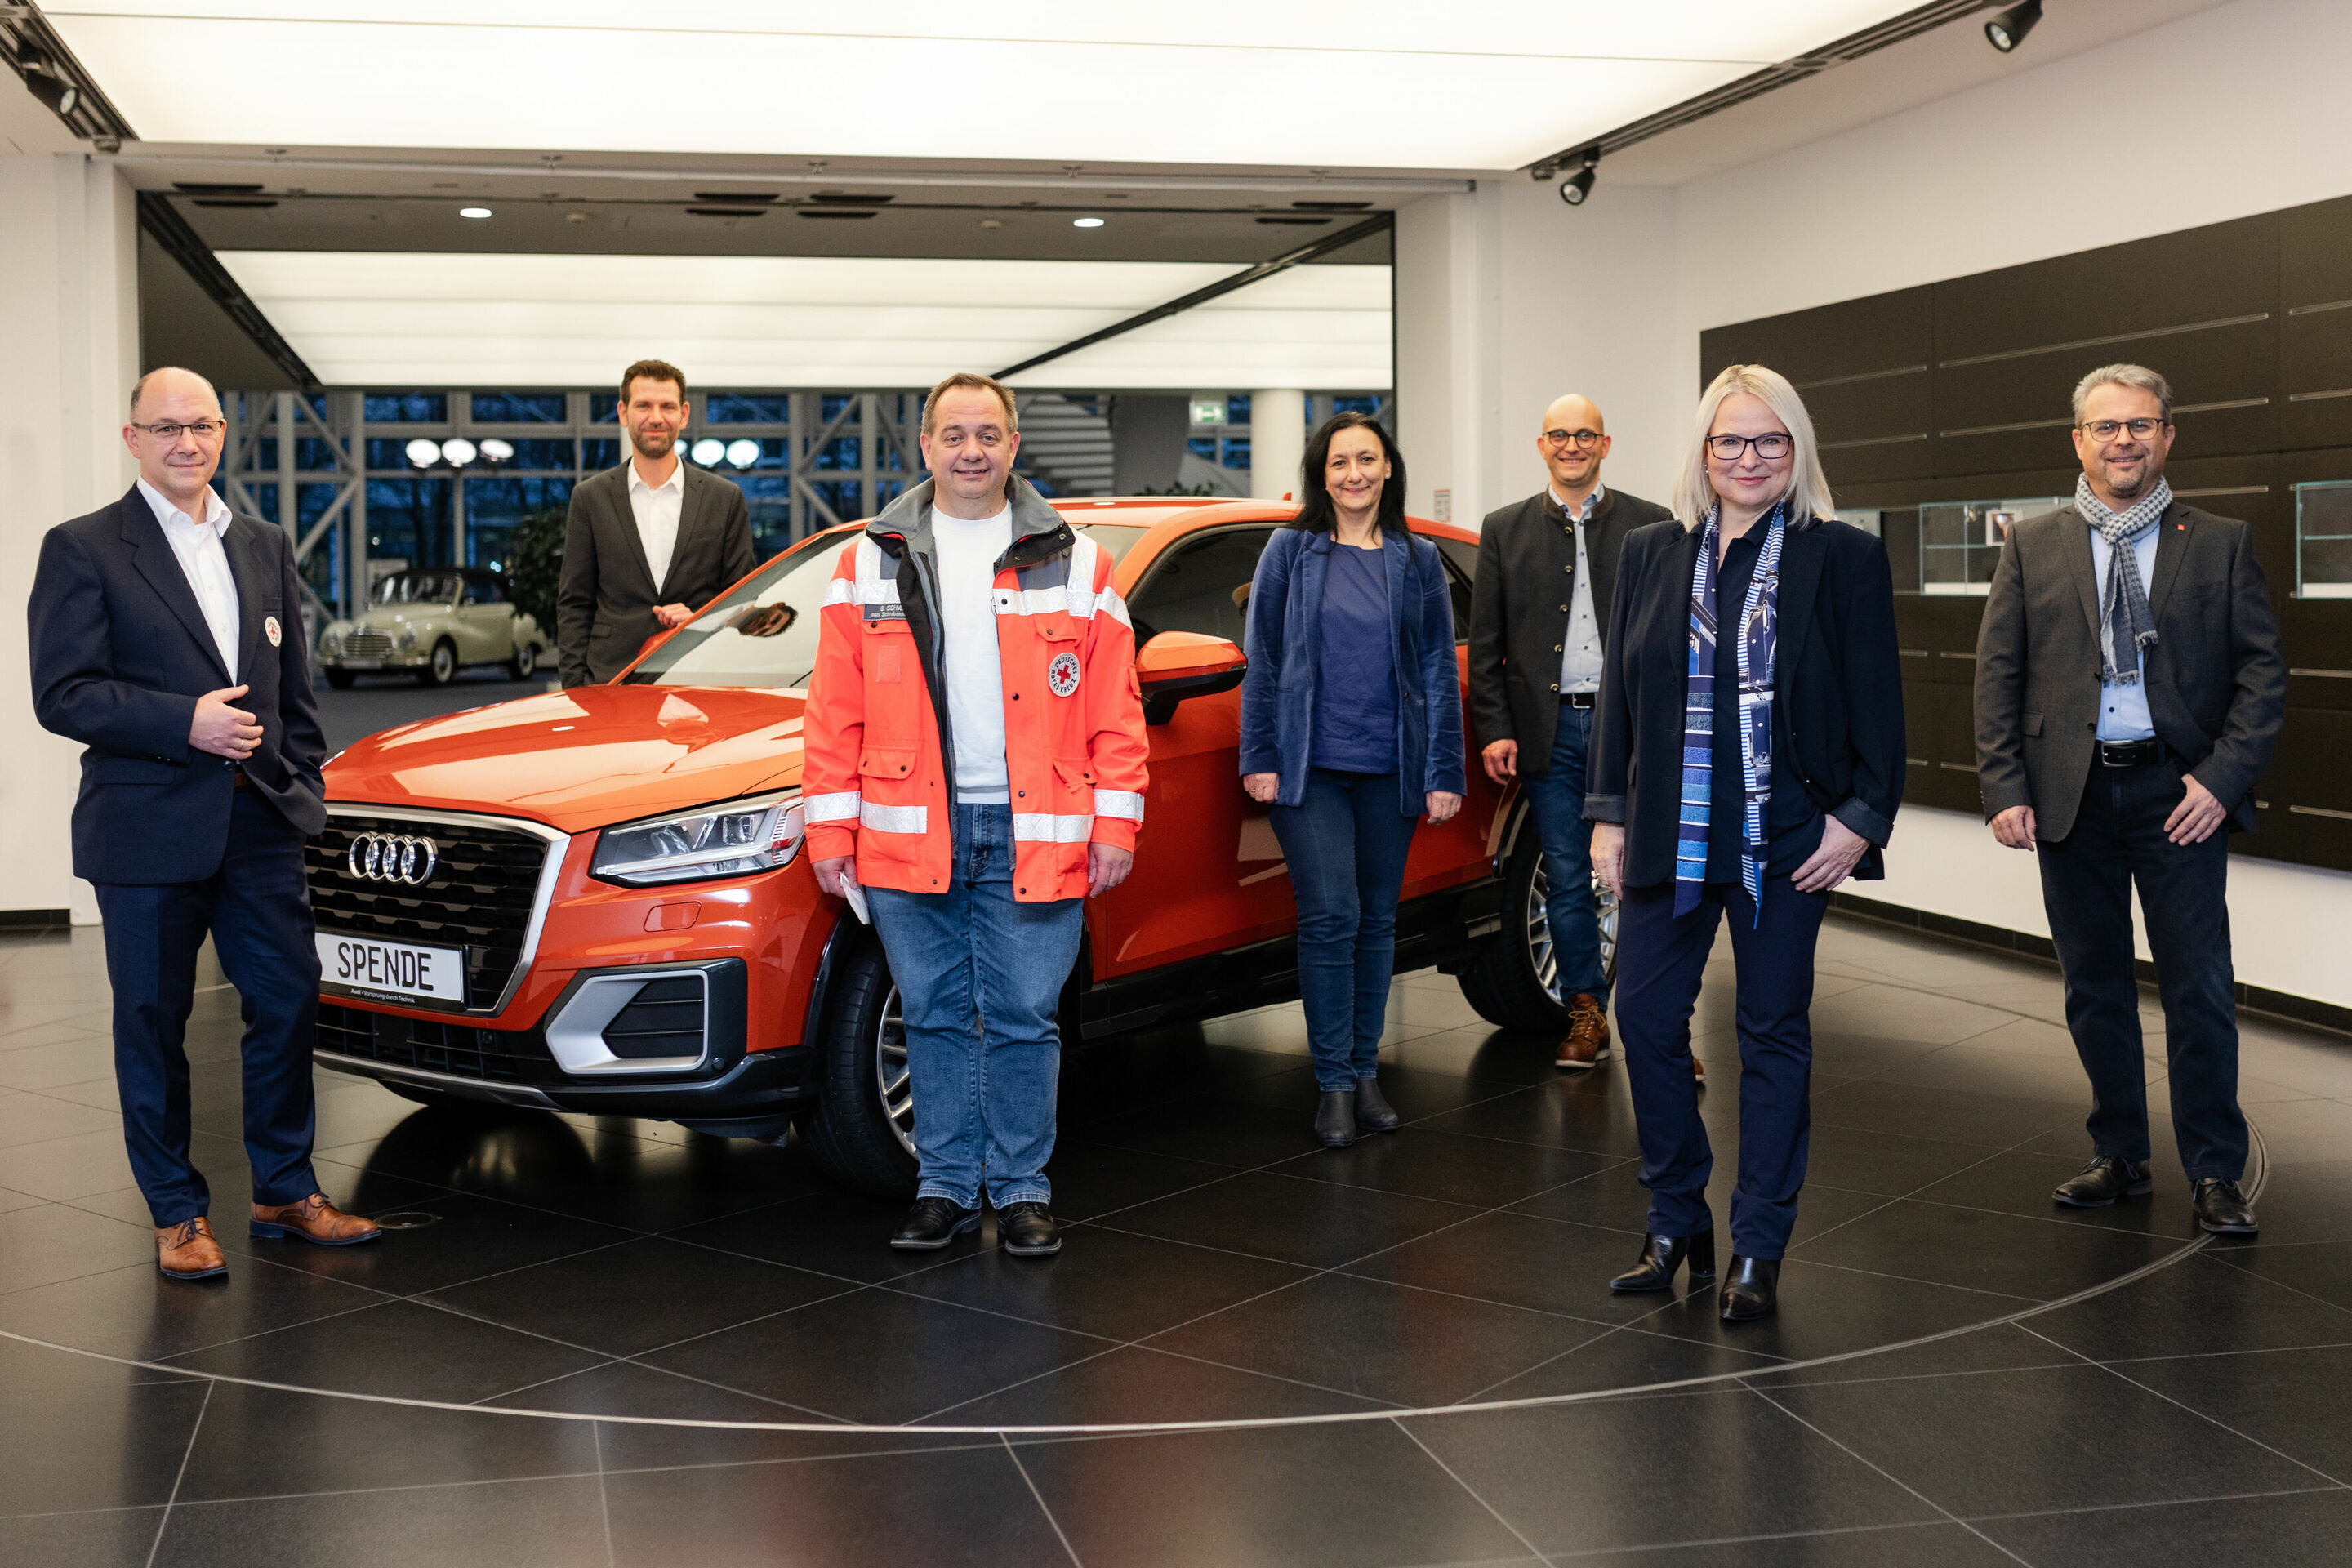 Vehicle handover as part of the Audi Christmas donation: Audi Q2 for first responders in Schrobenhausen